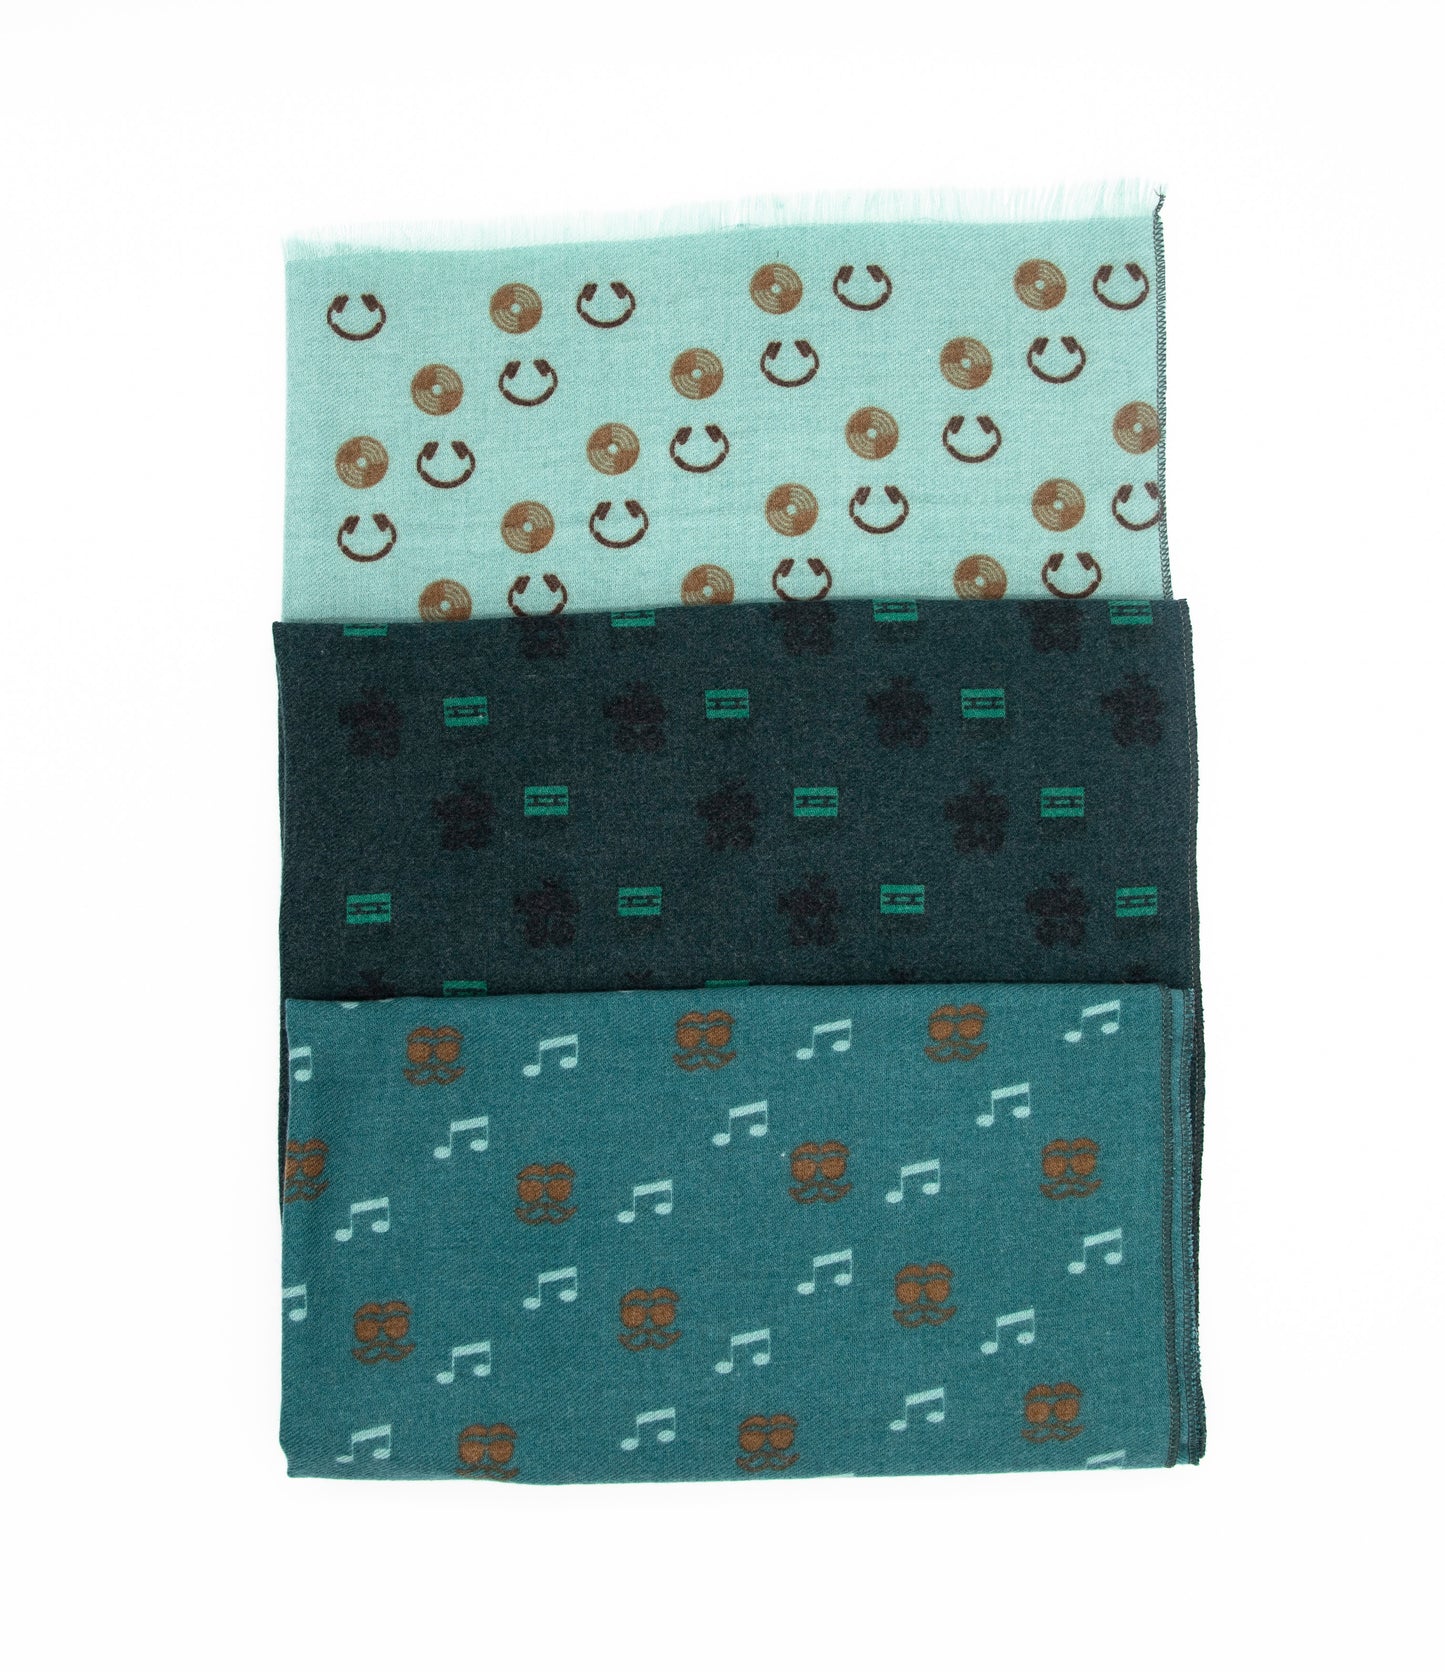 This is a soft and warm cotton scarf for men and for women with unique patterns of headphones, camera and vinyl disc in three shades of green and brown made from a special cotton blend that gives you a wonderful cashmere-like feeling without hurting animals. This is a completely vegan scarf certified by PETA and a perfect gift idea for both men and women.